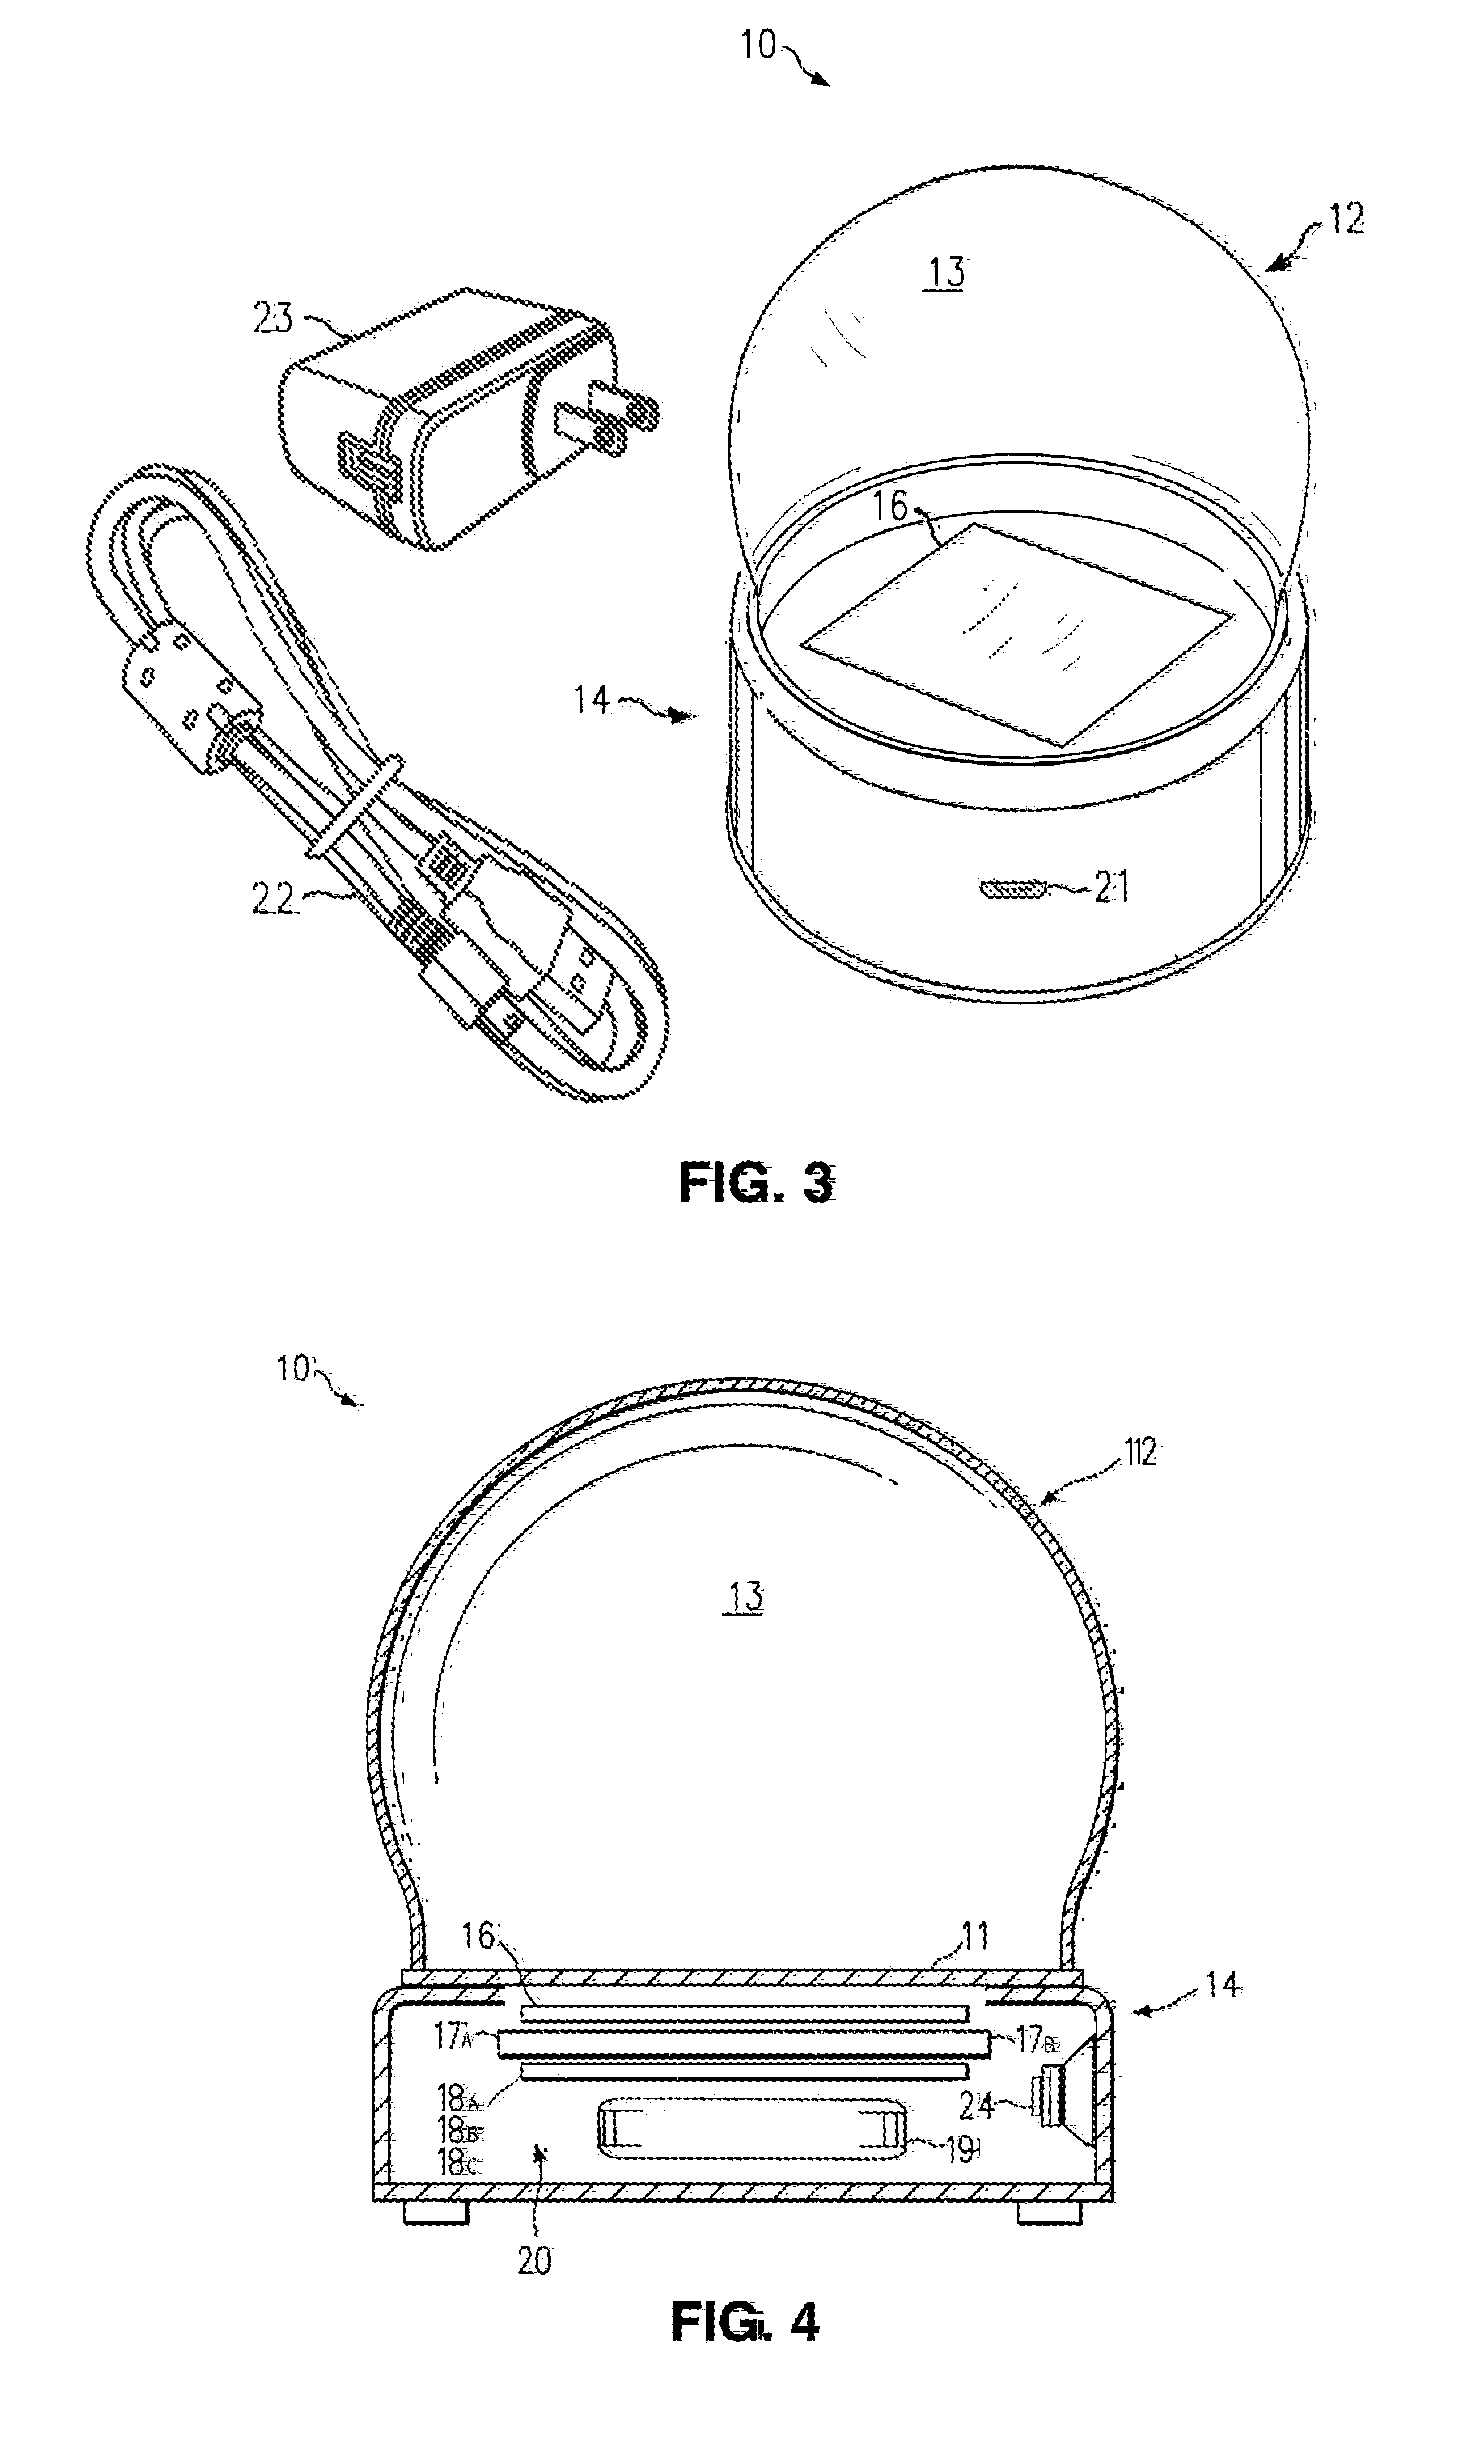 Apparatus for Electronic Presentation of Time-Varying Digital Imagery With or Without Accompanying Audio Under a Transparent or Translucent Form in Response to Sensor Data